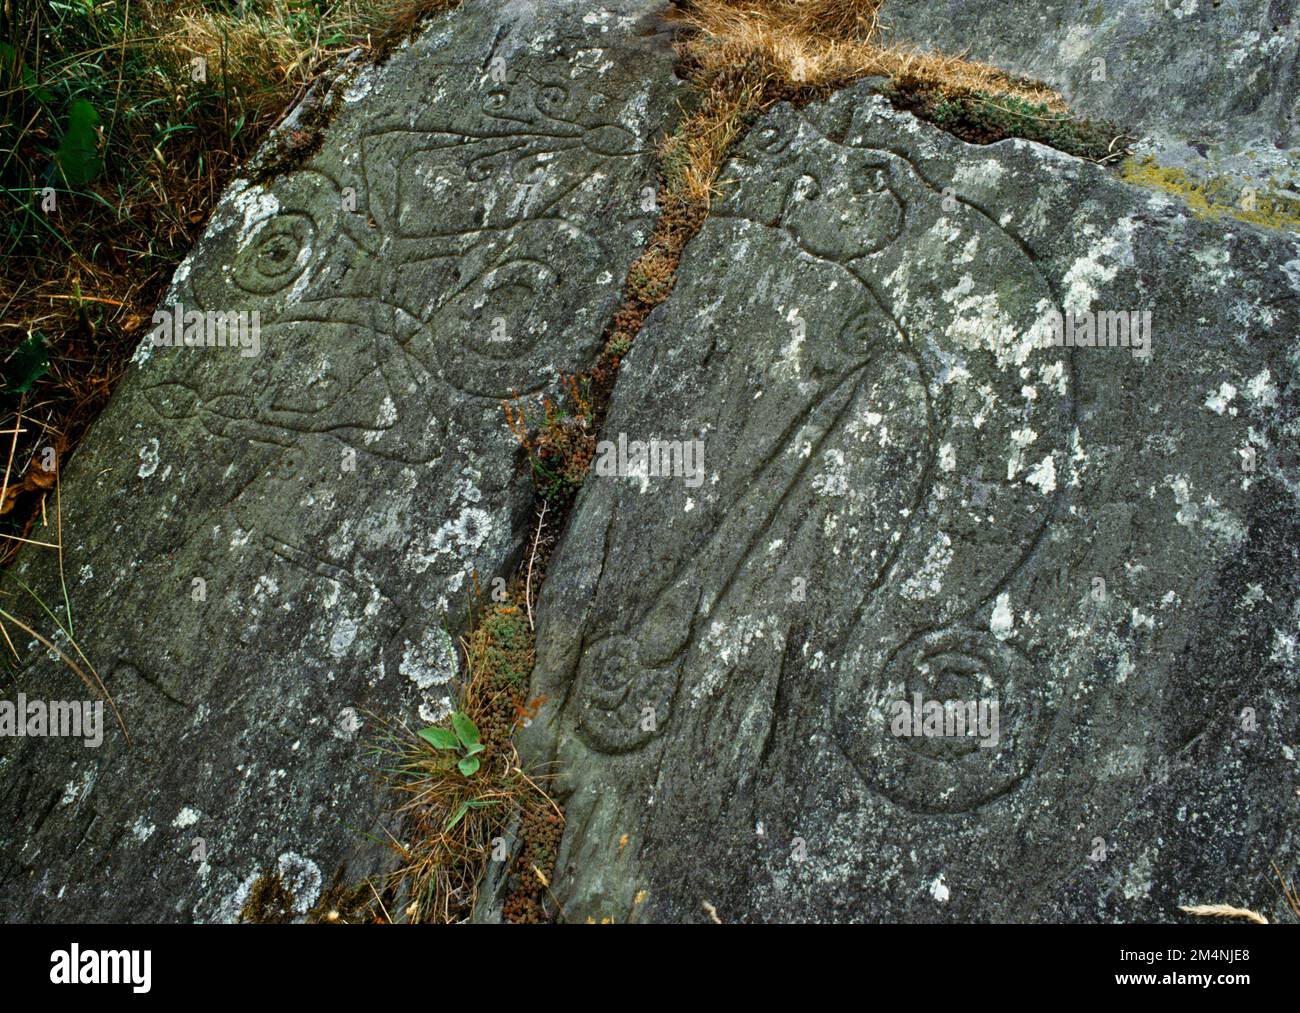 Pictish symbols carved on a rock outcrop beside the SE entrance passage to Trusty's Hill fort, Anwoth, Dumfries and Galloway, Scotland, UK. Stock Photo